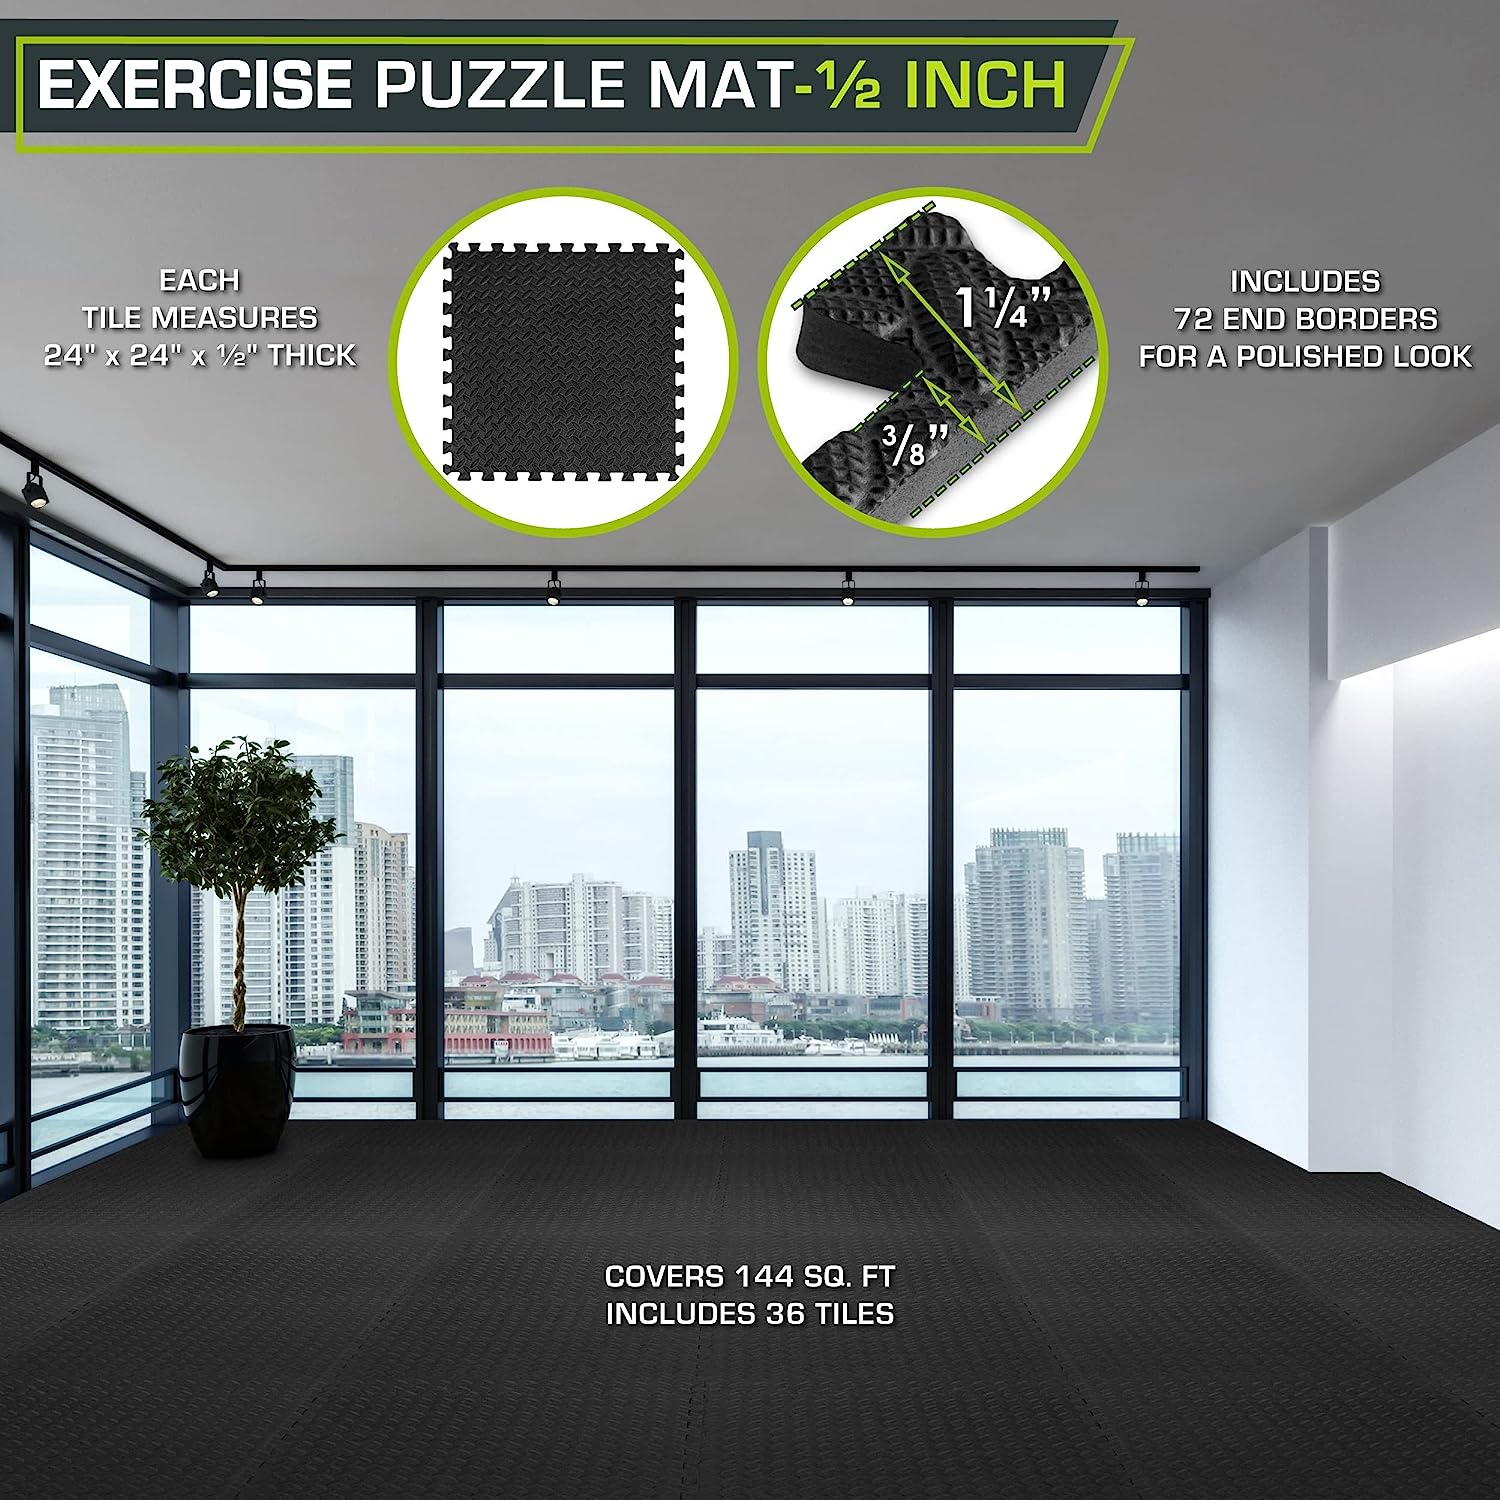 Puzzle Exercise Mat ½” Eva Interlocking Foam Floor Tiles For Home Gym Mat For Home Workout Equipment Floor Padding For Kids Available In Packs Of 24 SQ FT 48 SQ FT 144 SQ FT By PAIDU